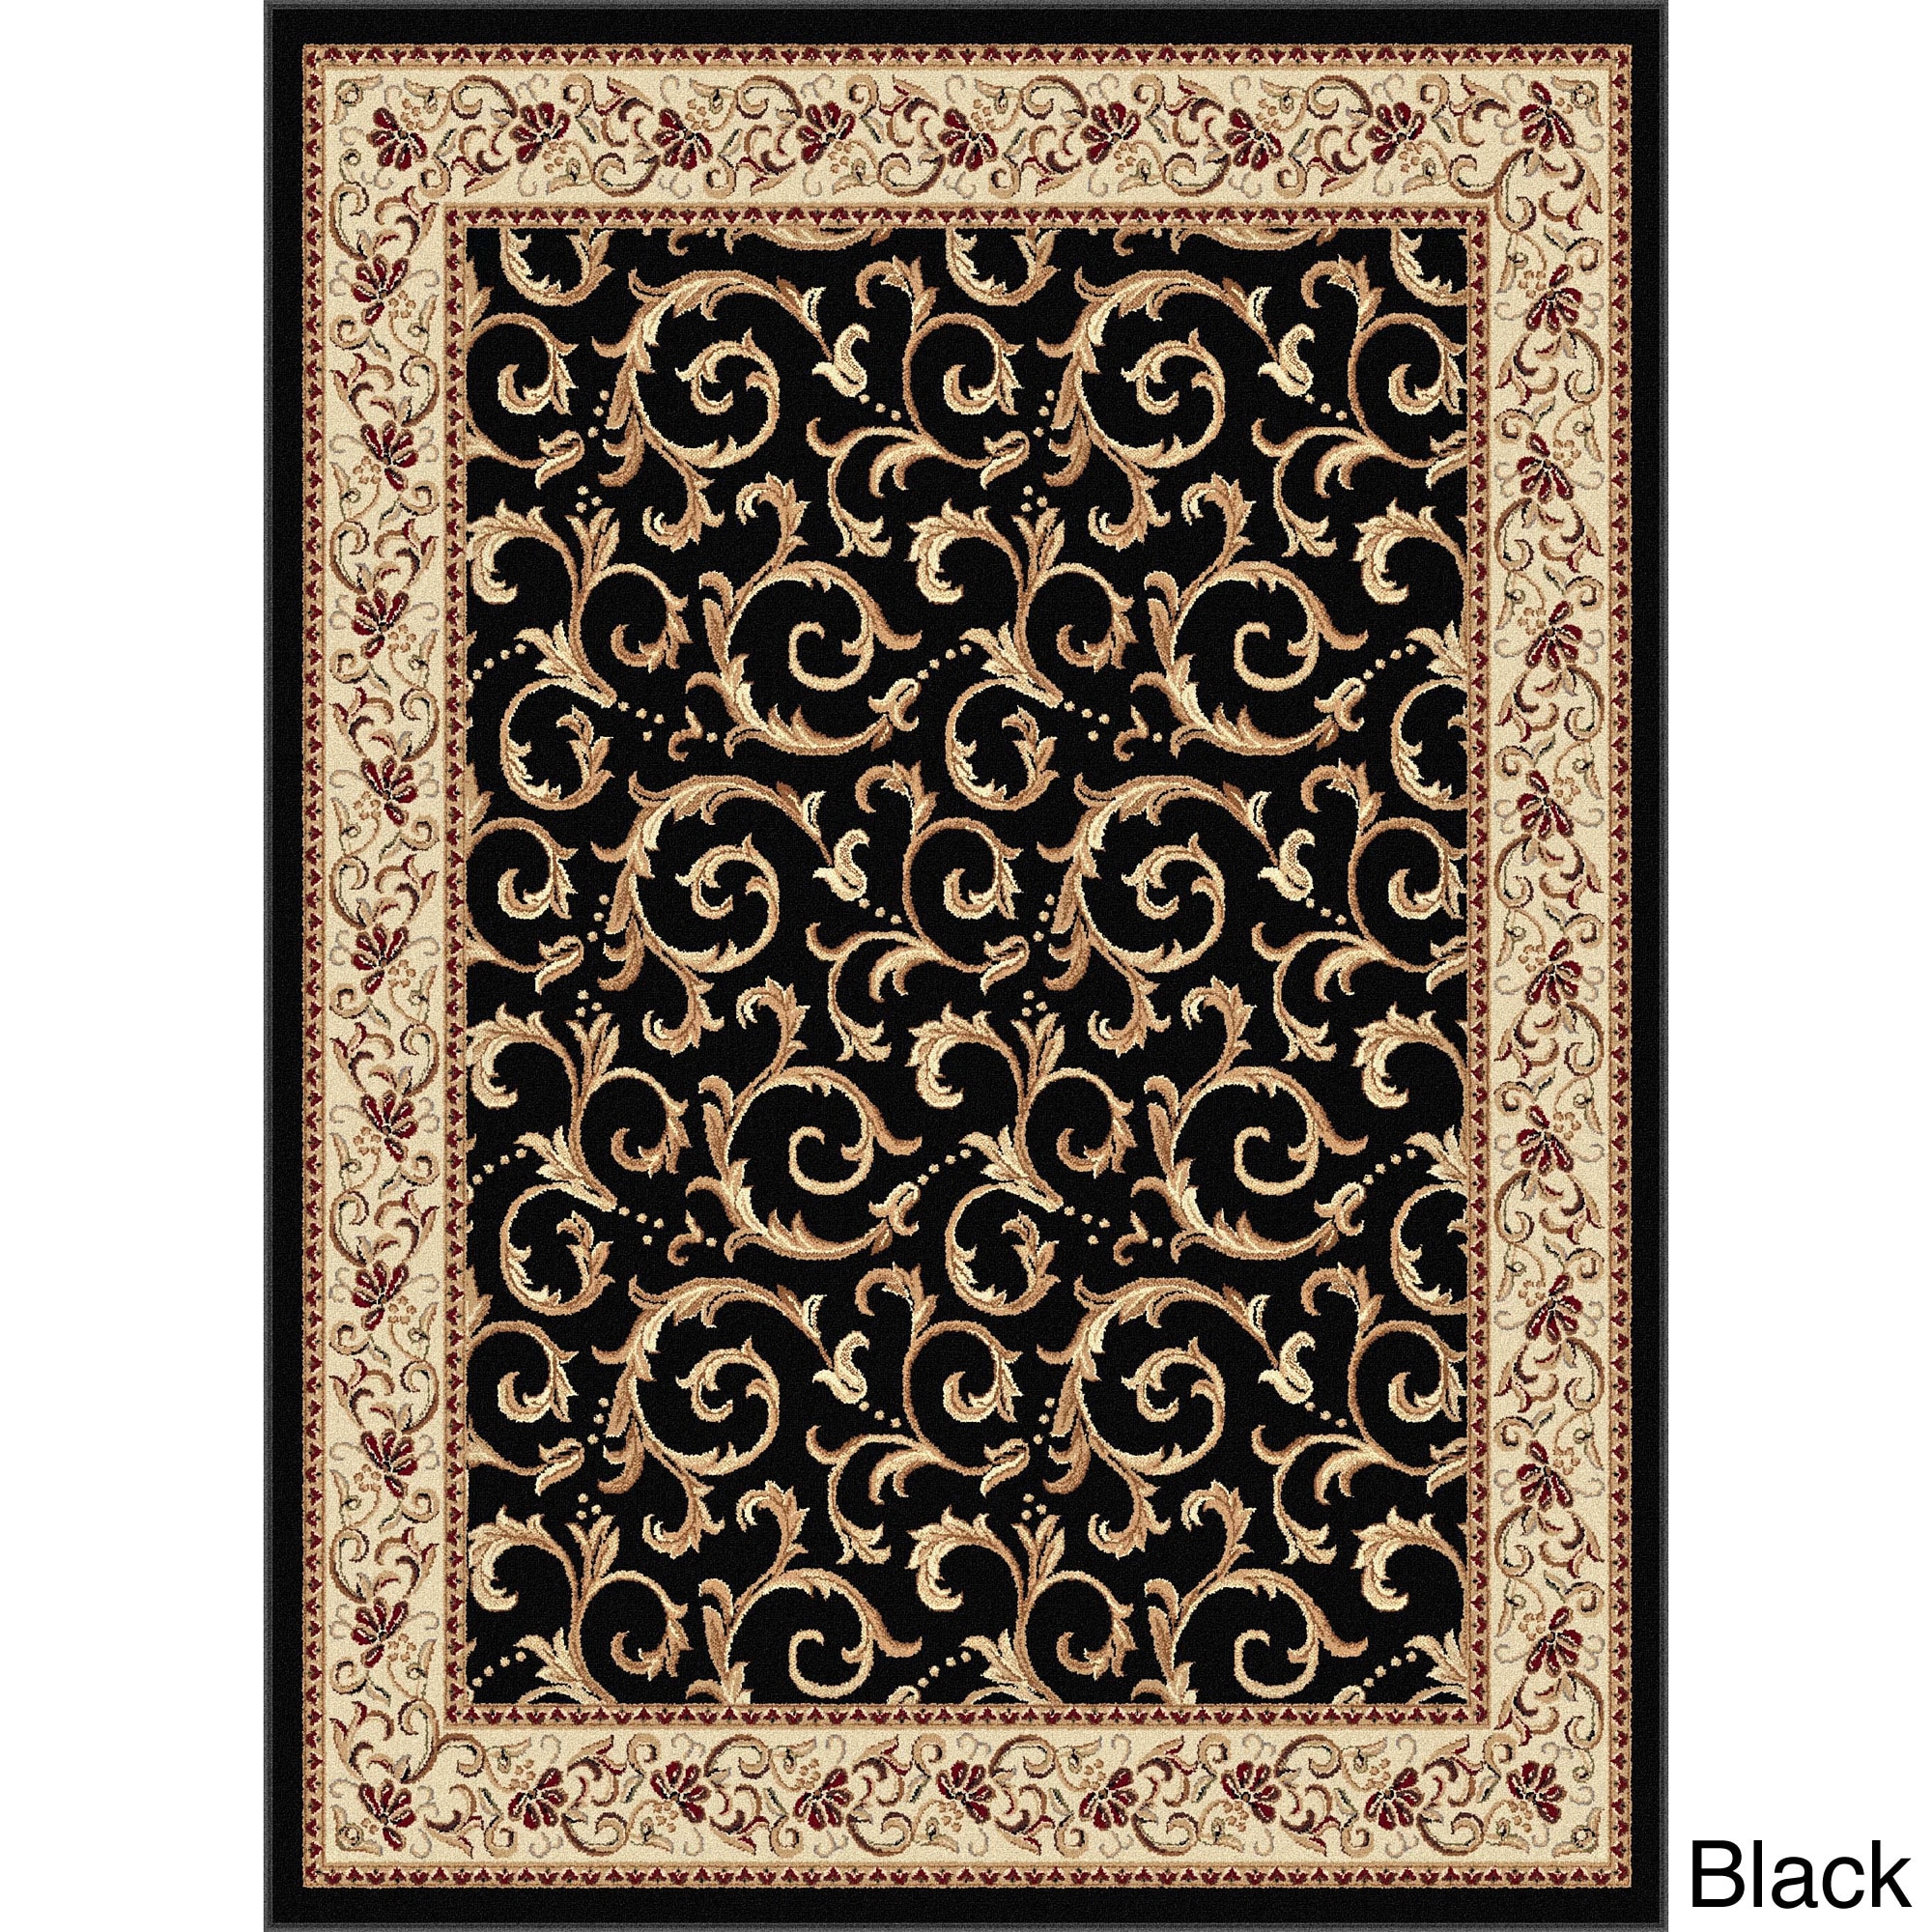 Rhythm 105400 Transitional Area Rug (93 X 126) (Varies based on option selectedSecondary Colors Beige, green, blueShape RectangleTip We recommend the use of a non skid pad to keep the rug in place on smooth surfaces.All rug sizes are approximate. Due t